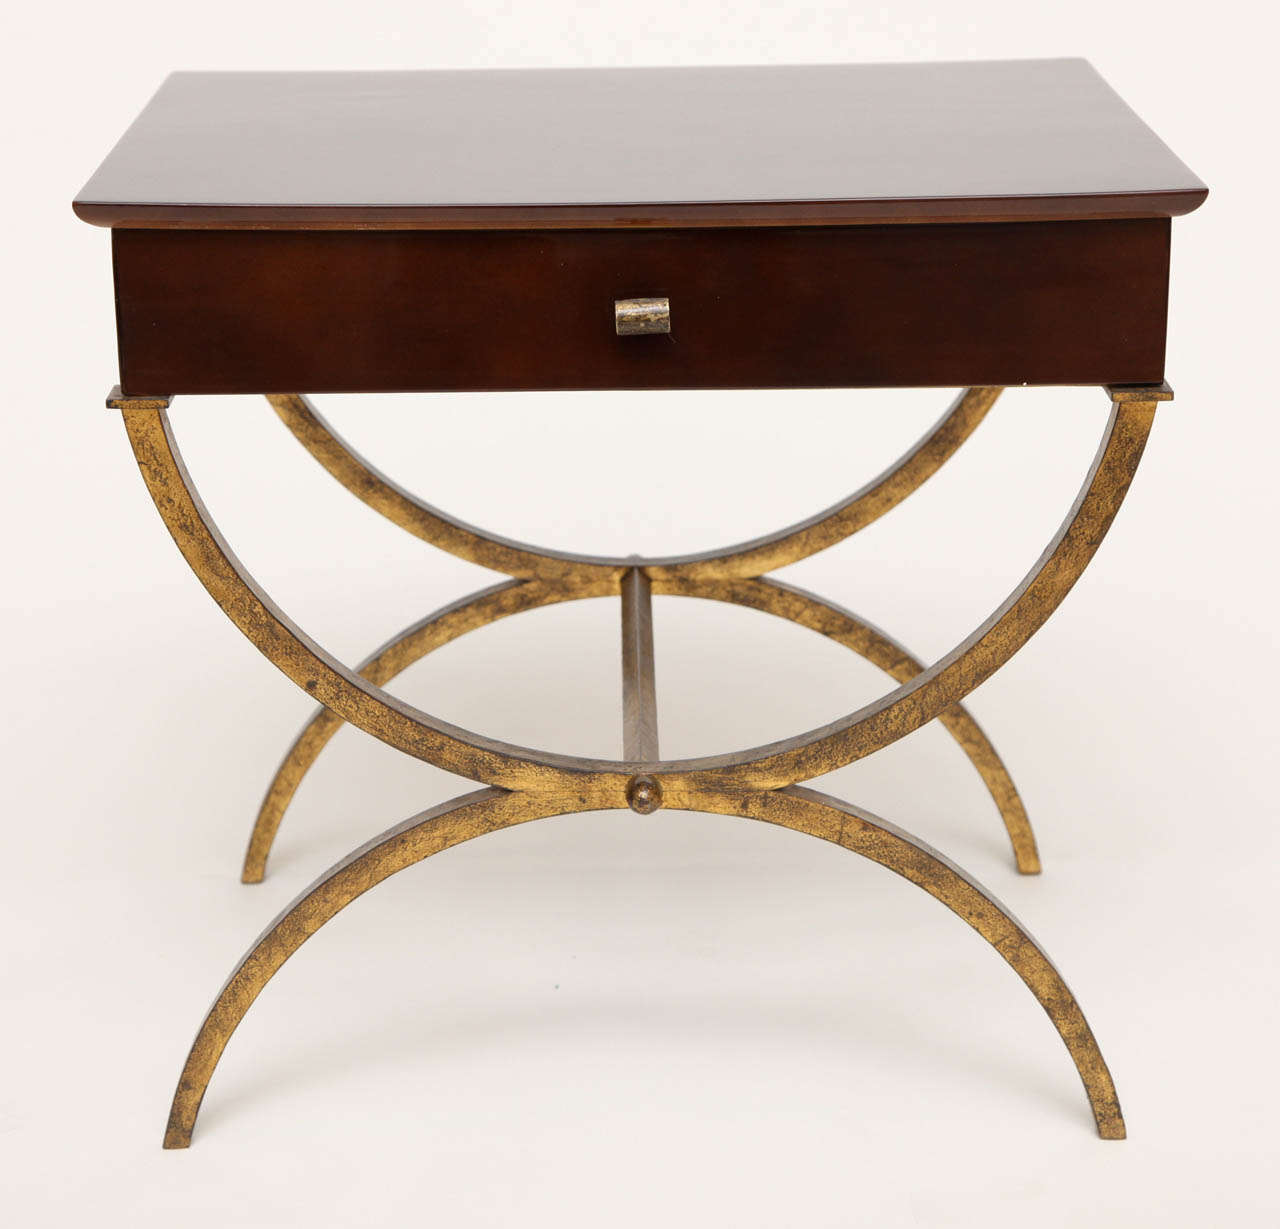 Brown lacquered side table with a gilt wrought-iron base